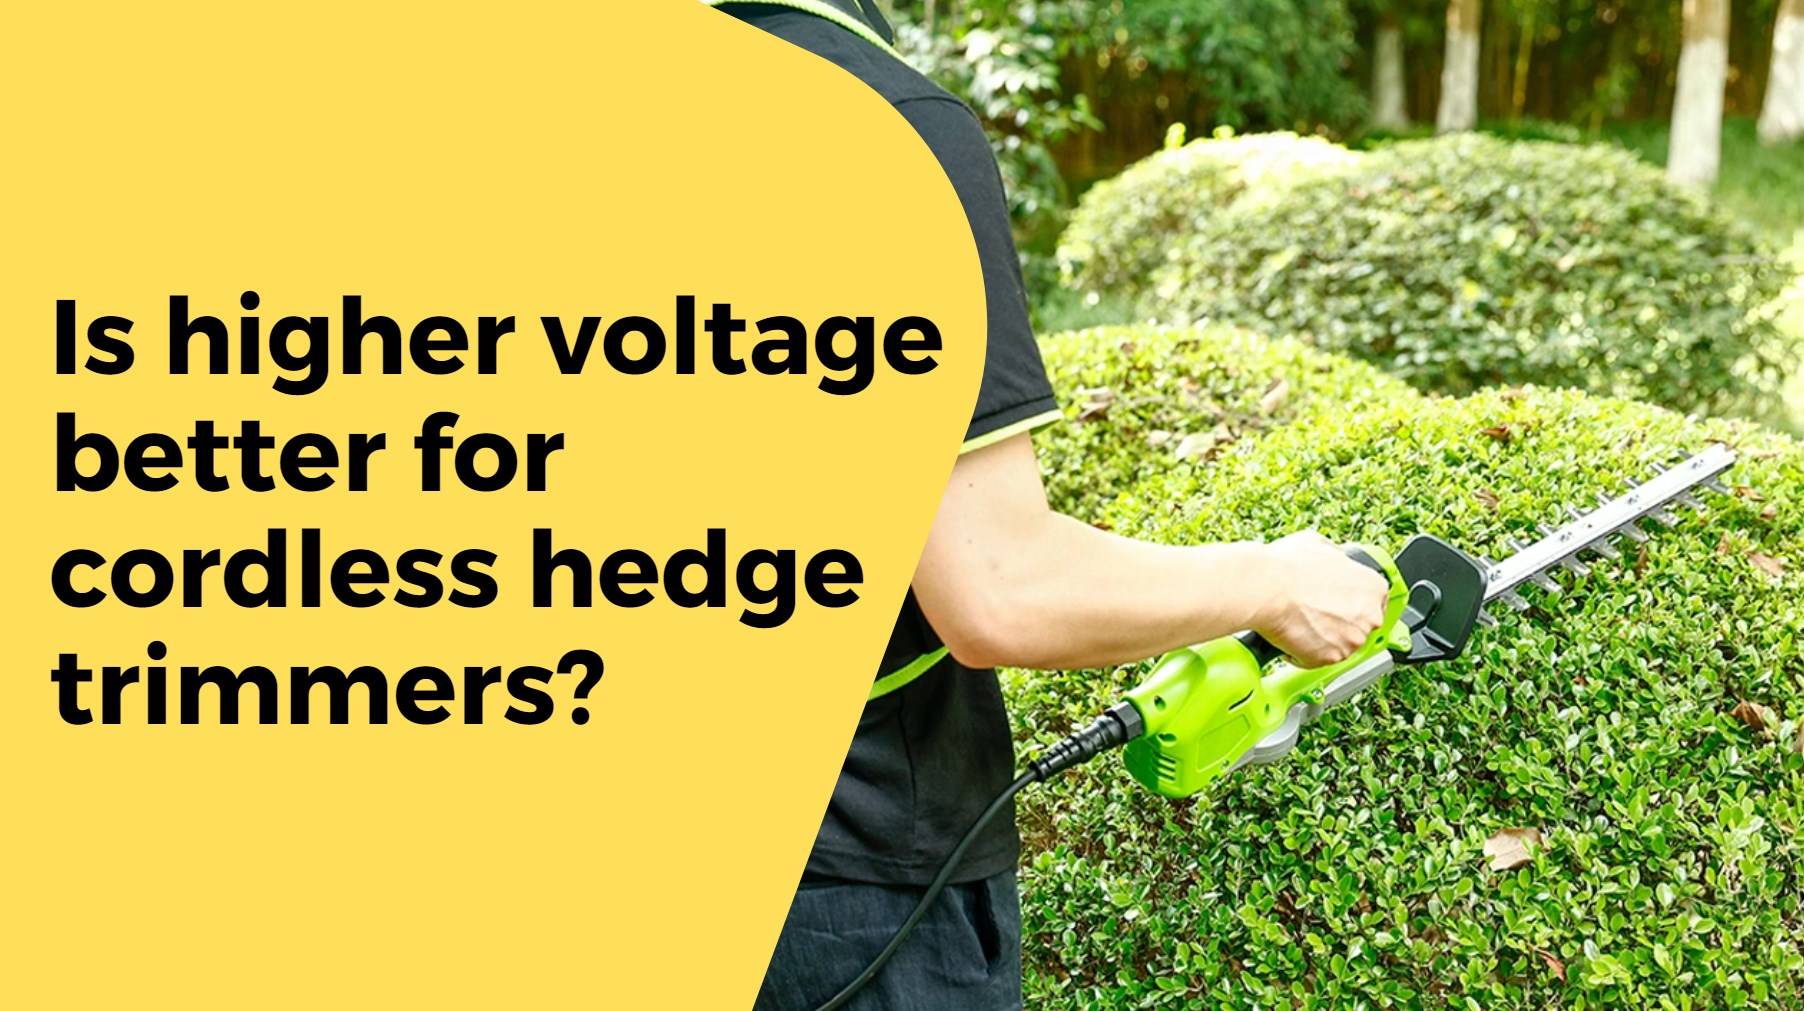 Is higher voltage better for cordless hedge trimmers?